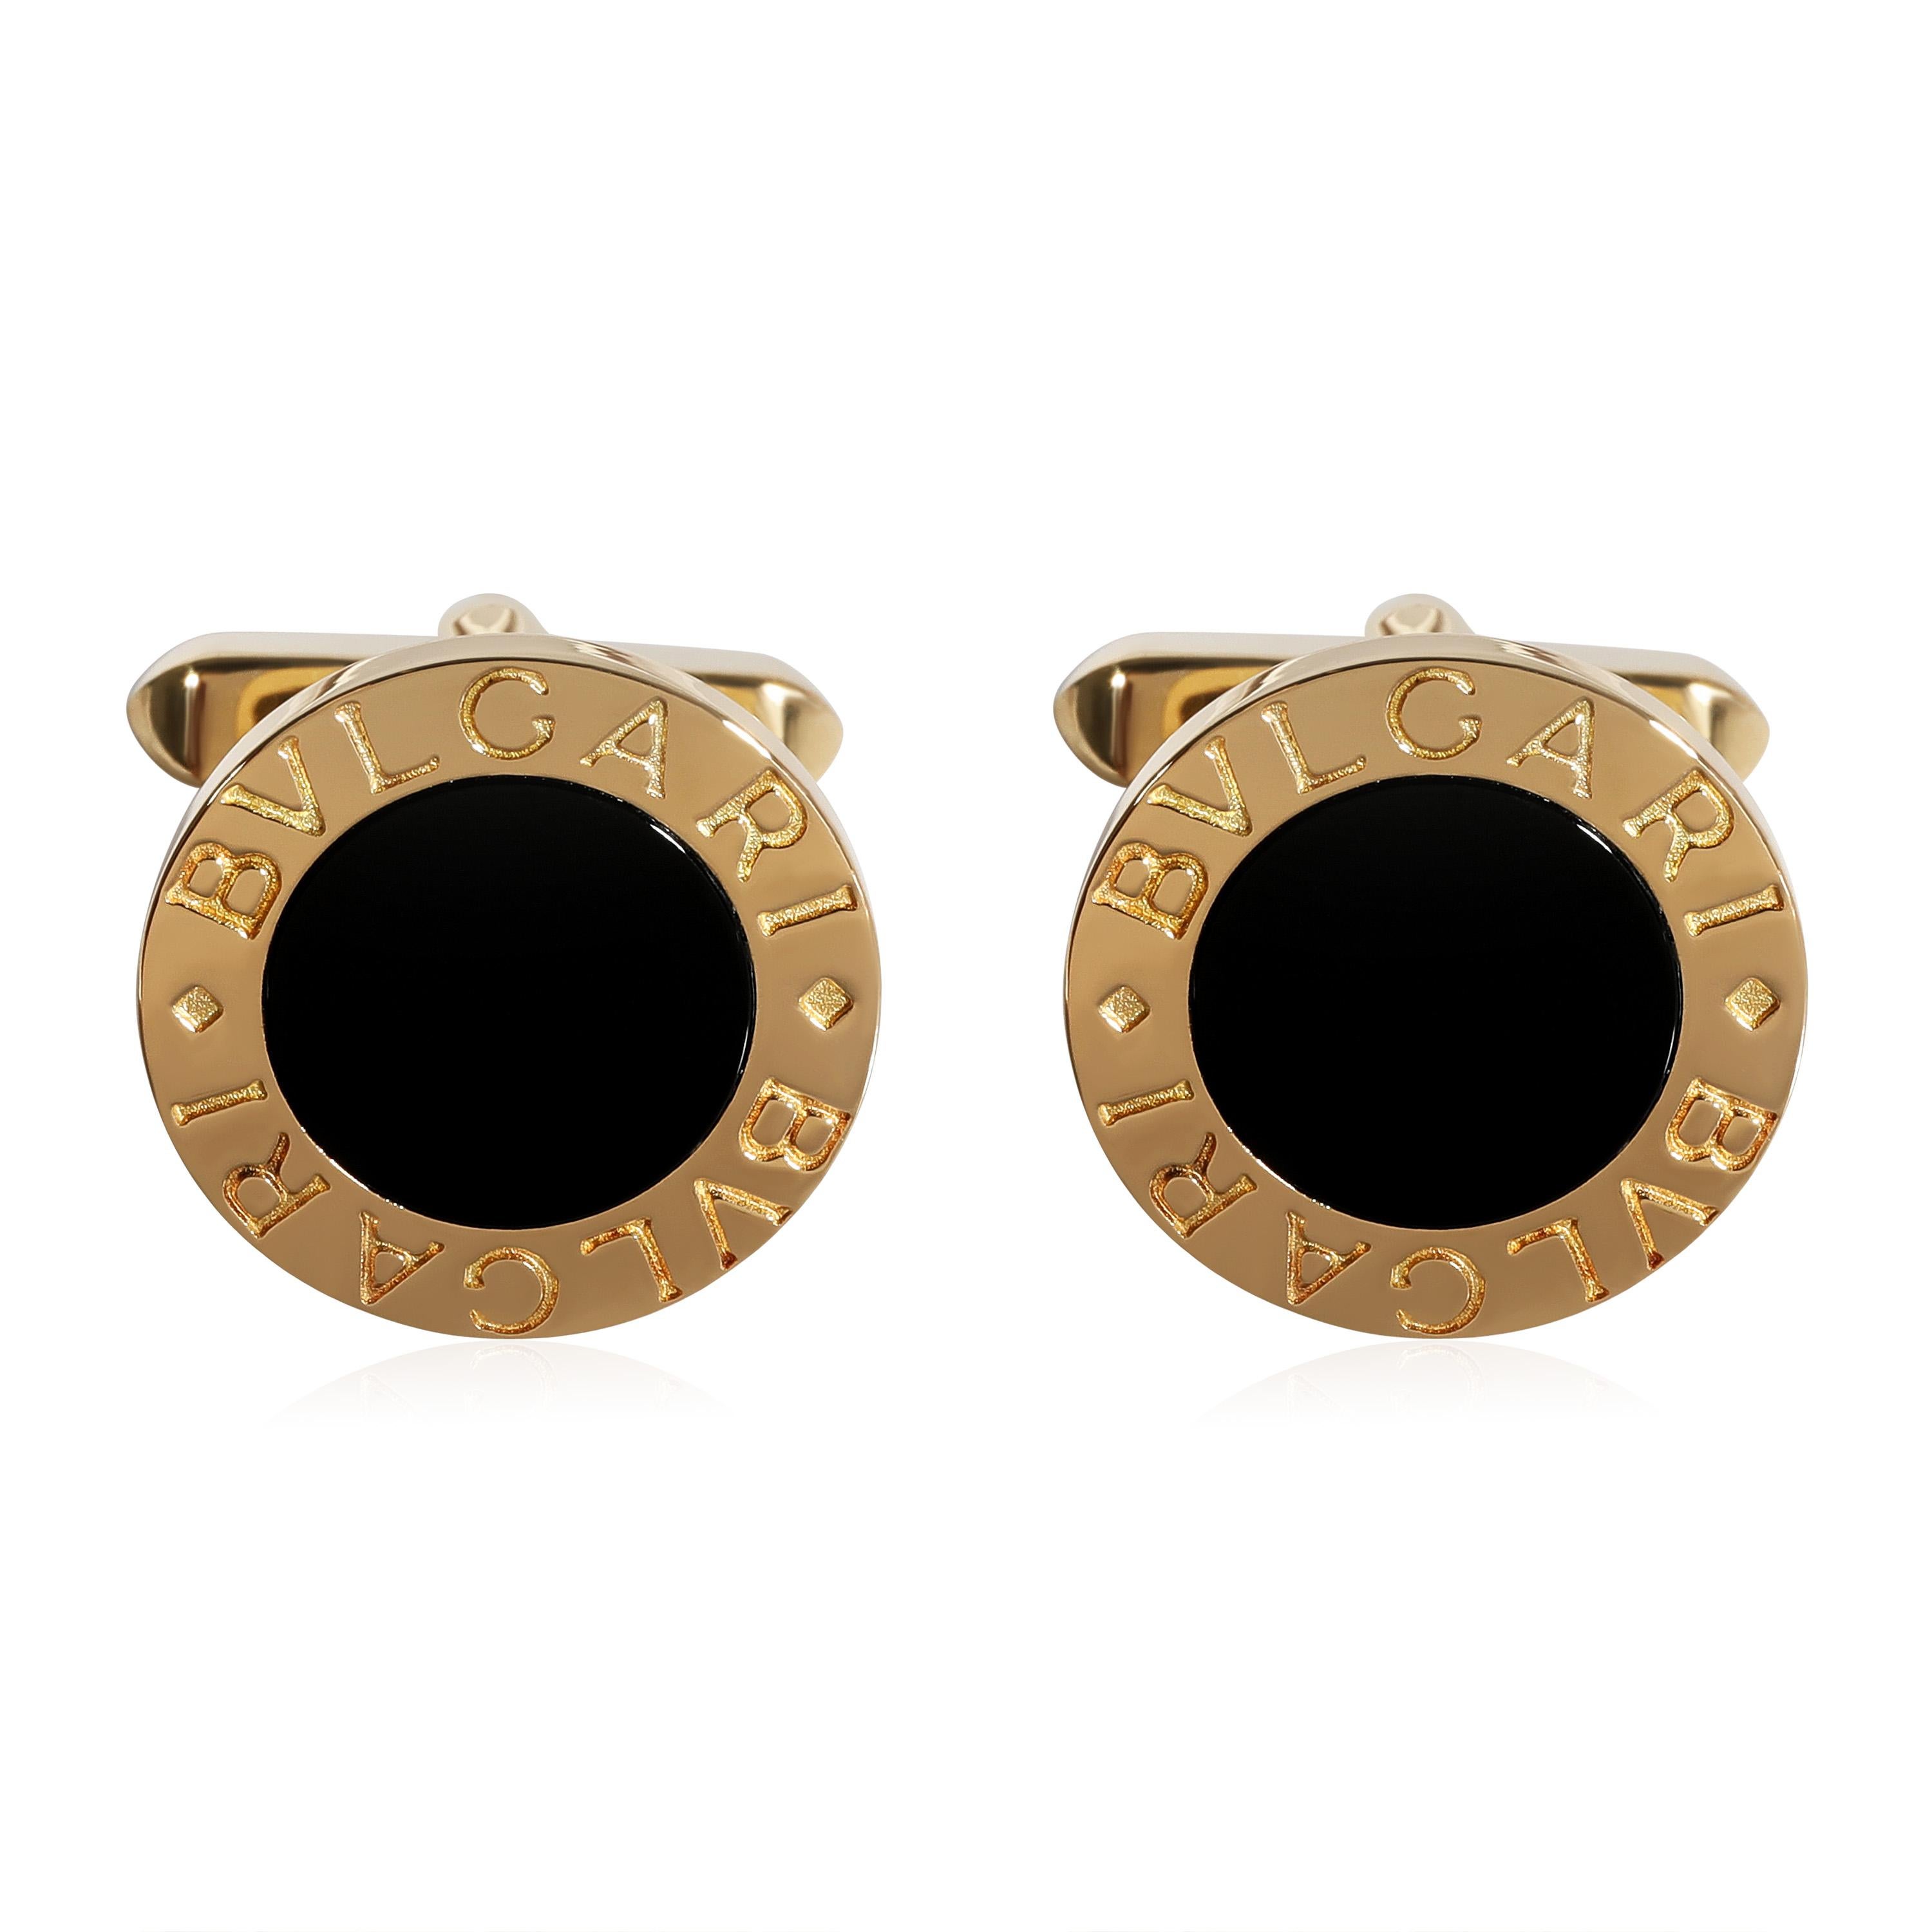 Bvlgari Bvlgari Bvlgari Vintage Cufflinks in 18k Yellow Gold In Excellent Condition For Sale In New York, NY